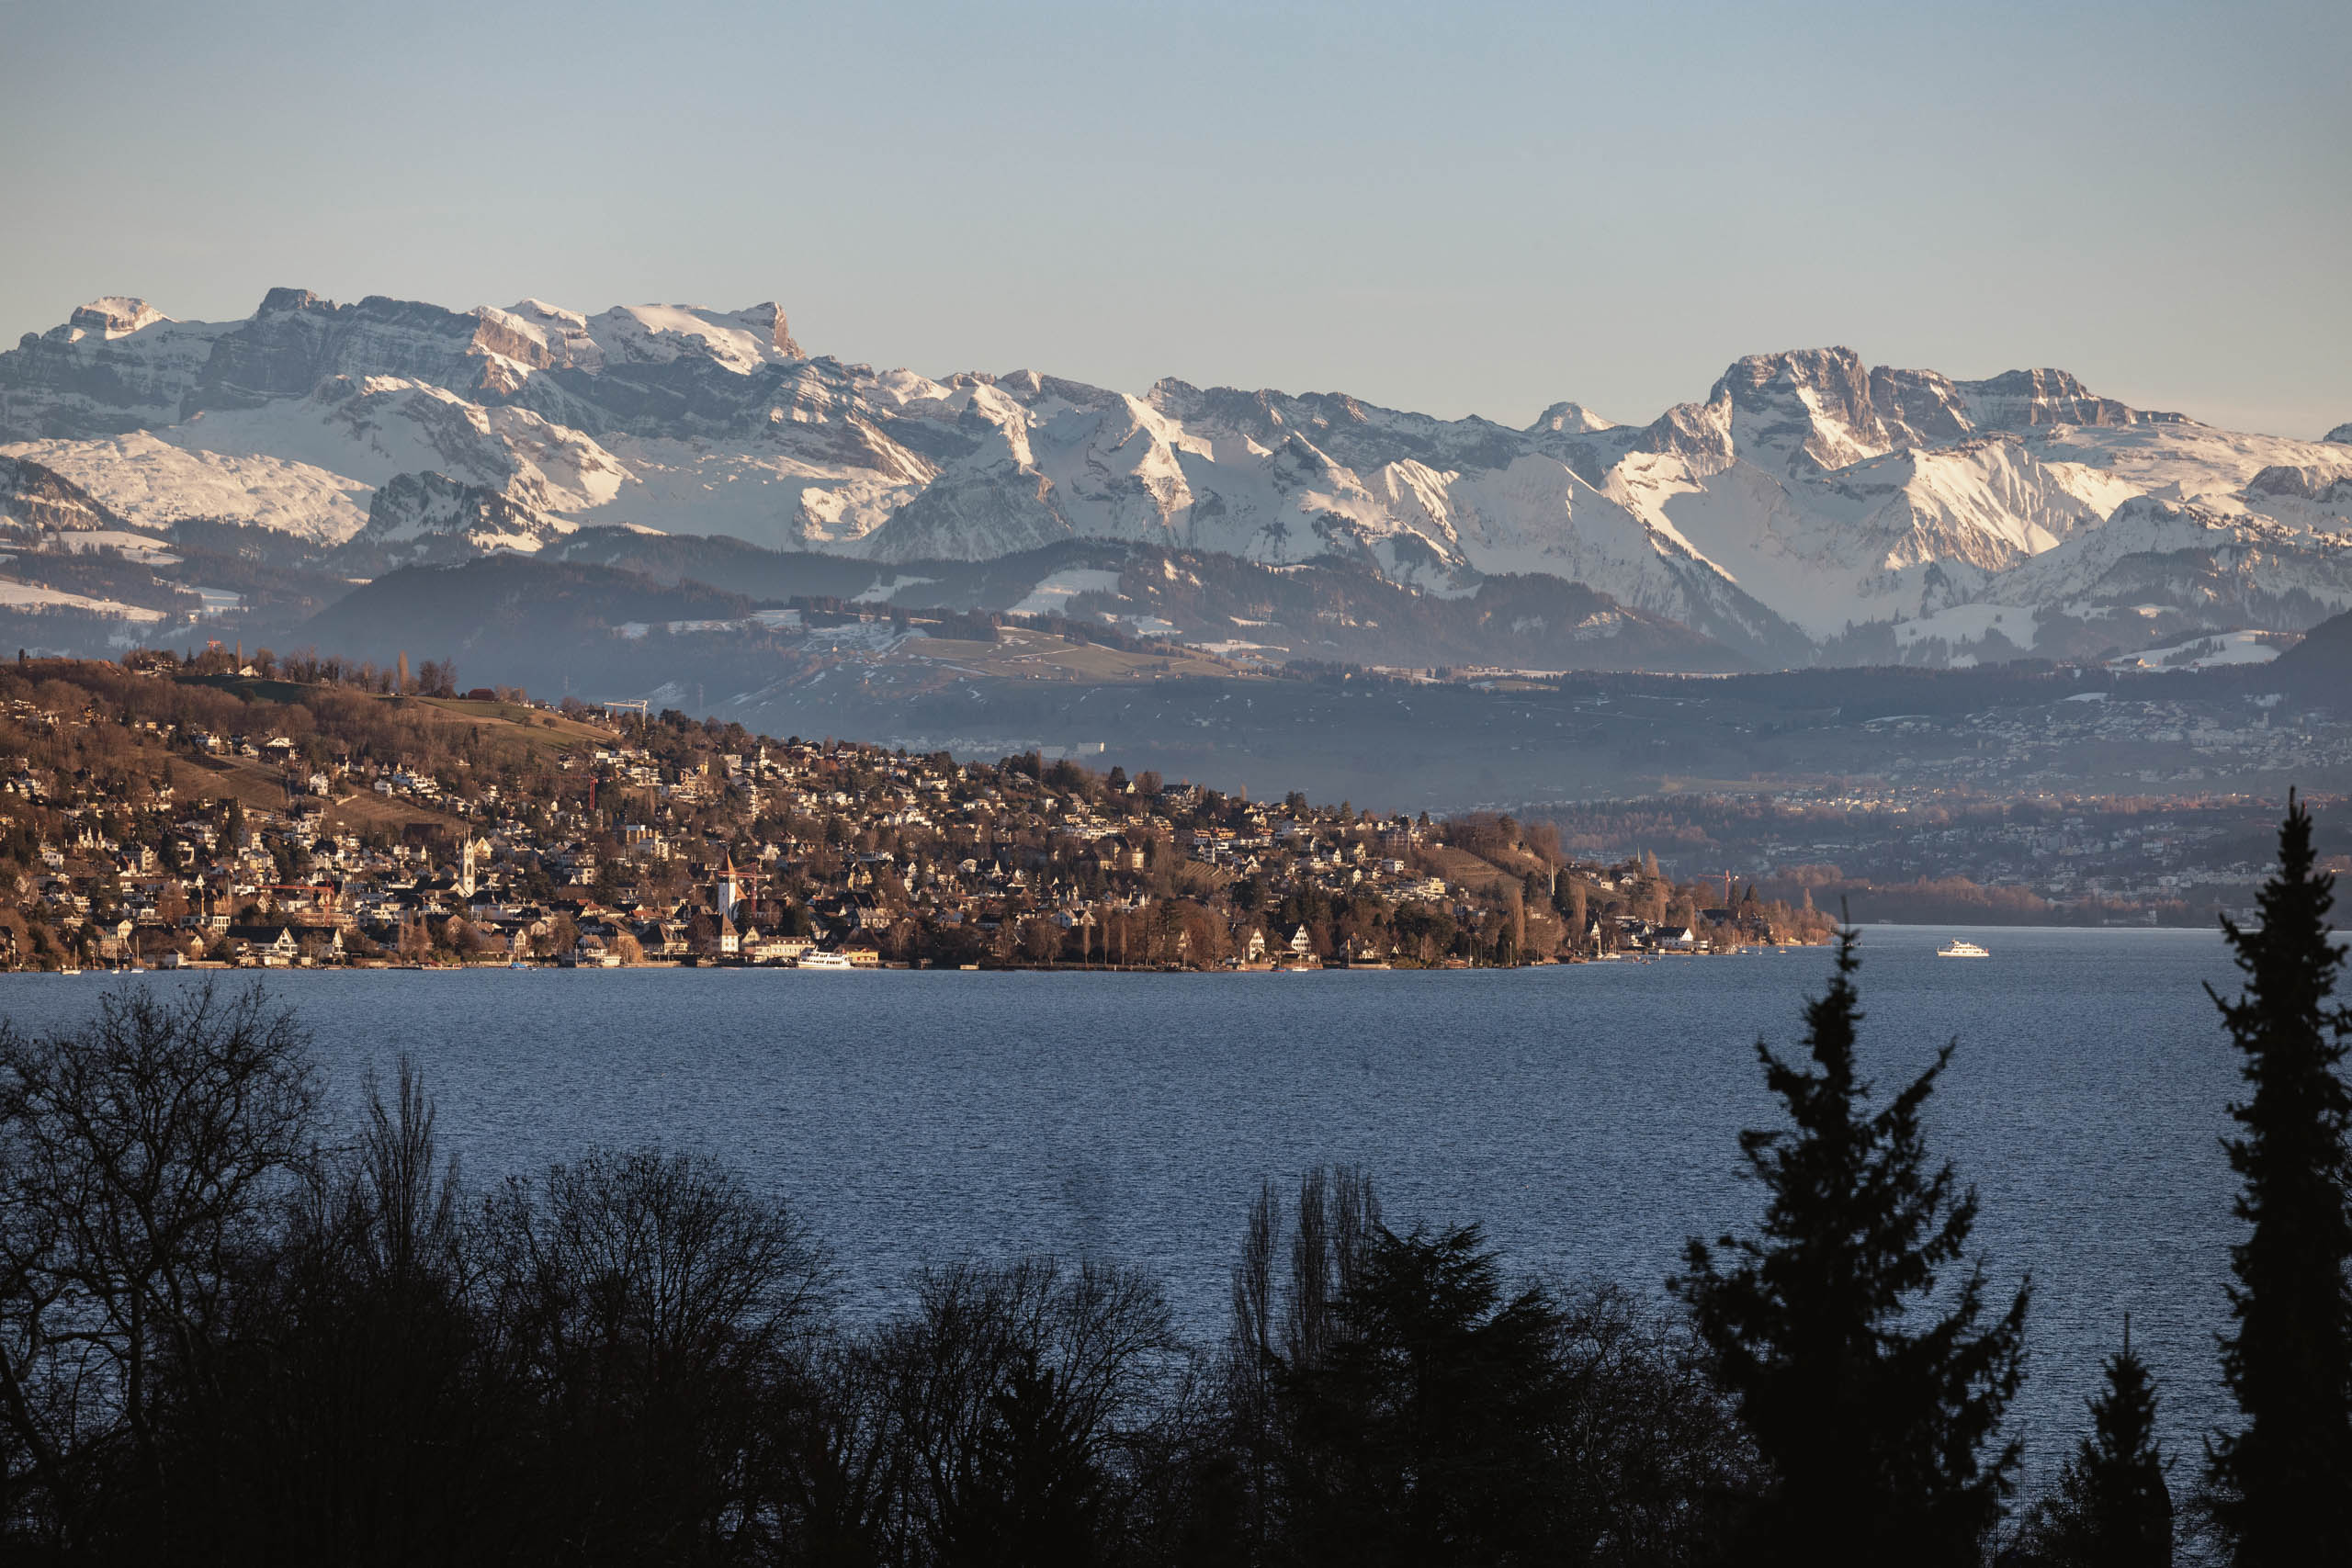 Swiss Deluxe Hotels Stories Winter 2022 Tips For An Unforgettable Time In Zurich 07 2L0A7941 Ecirgb